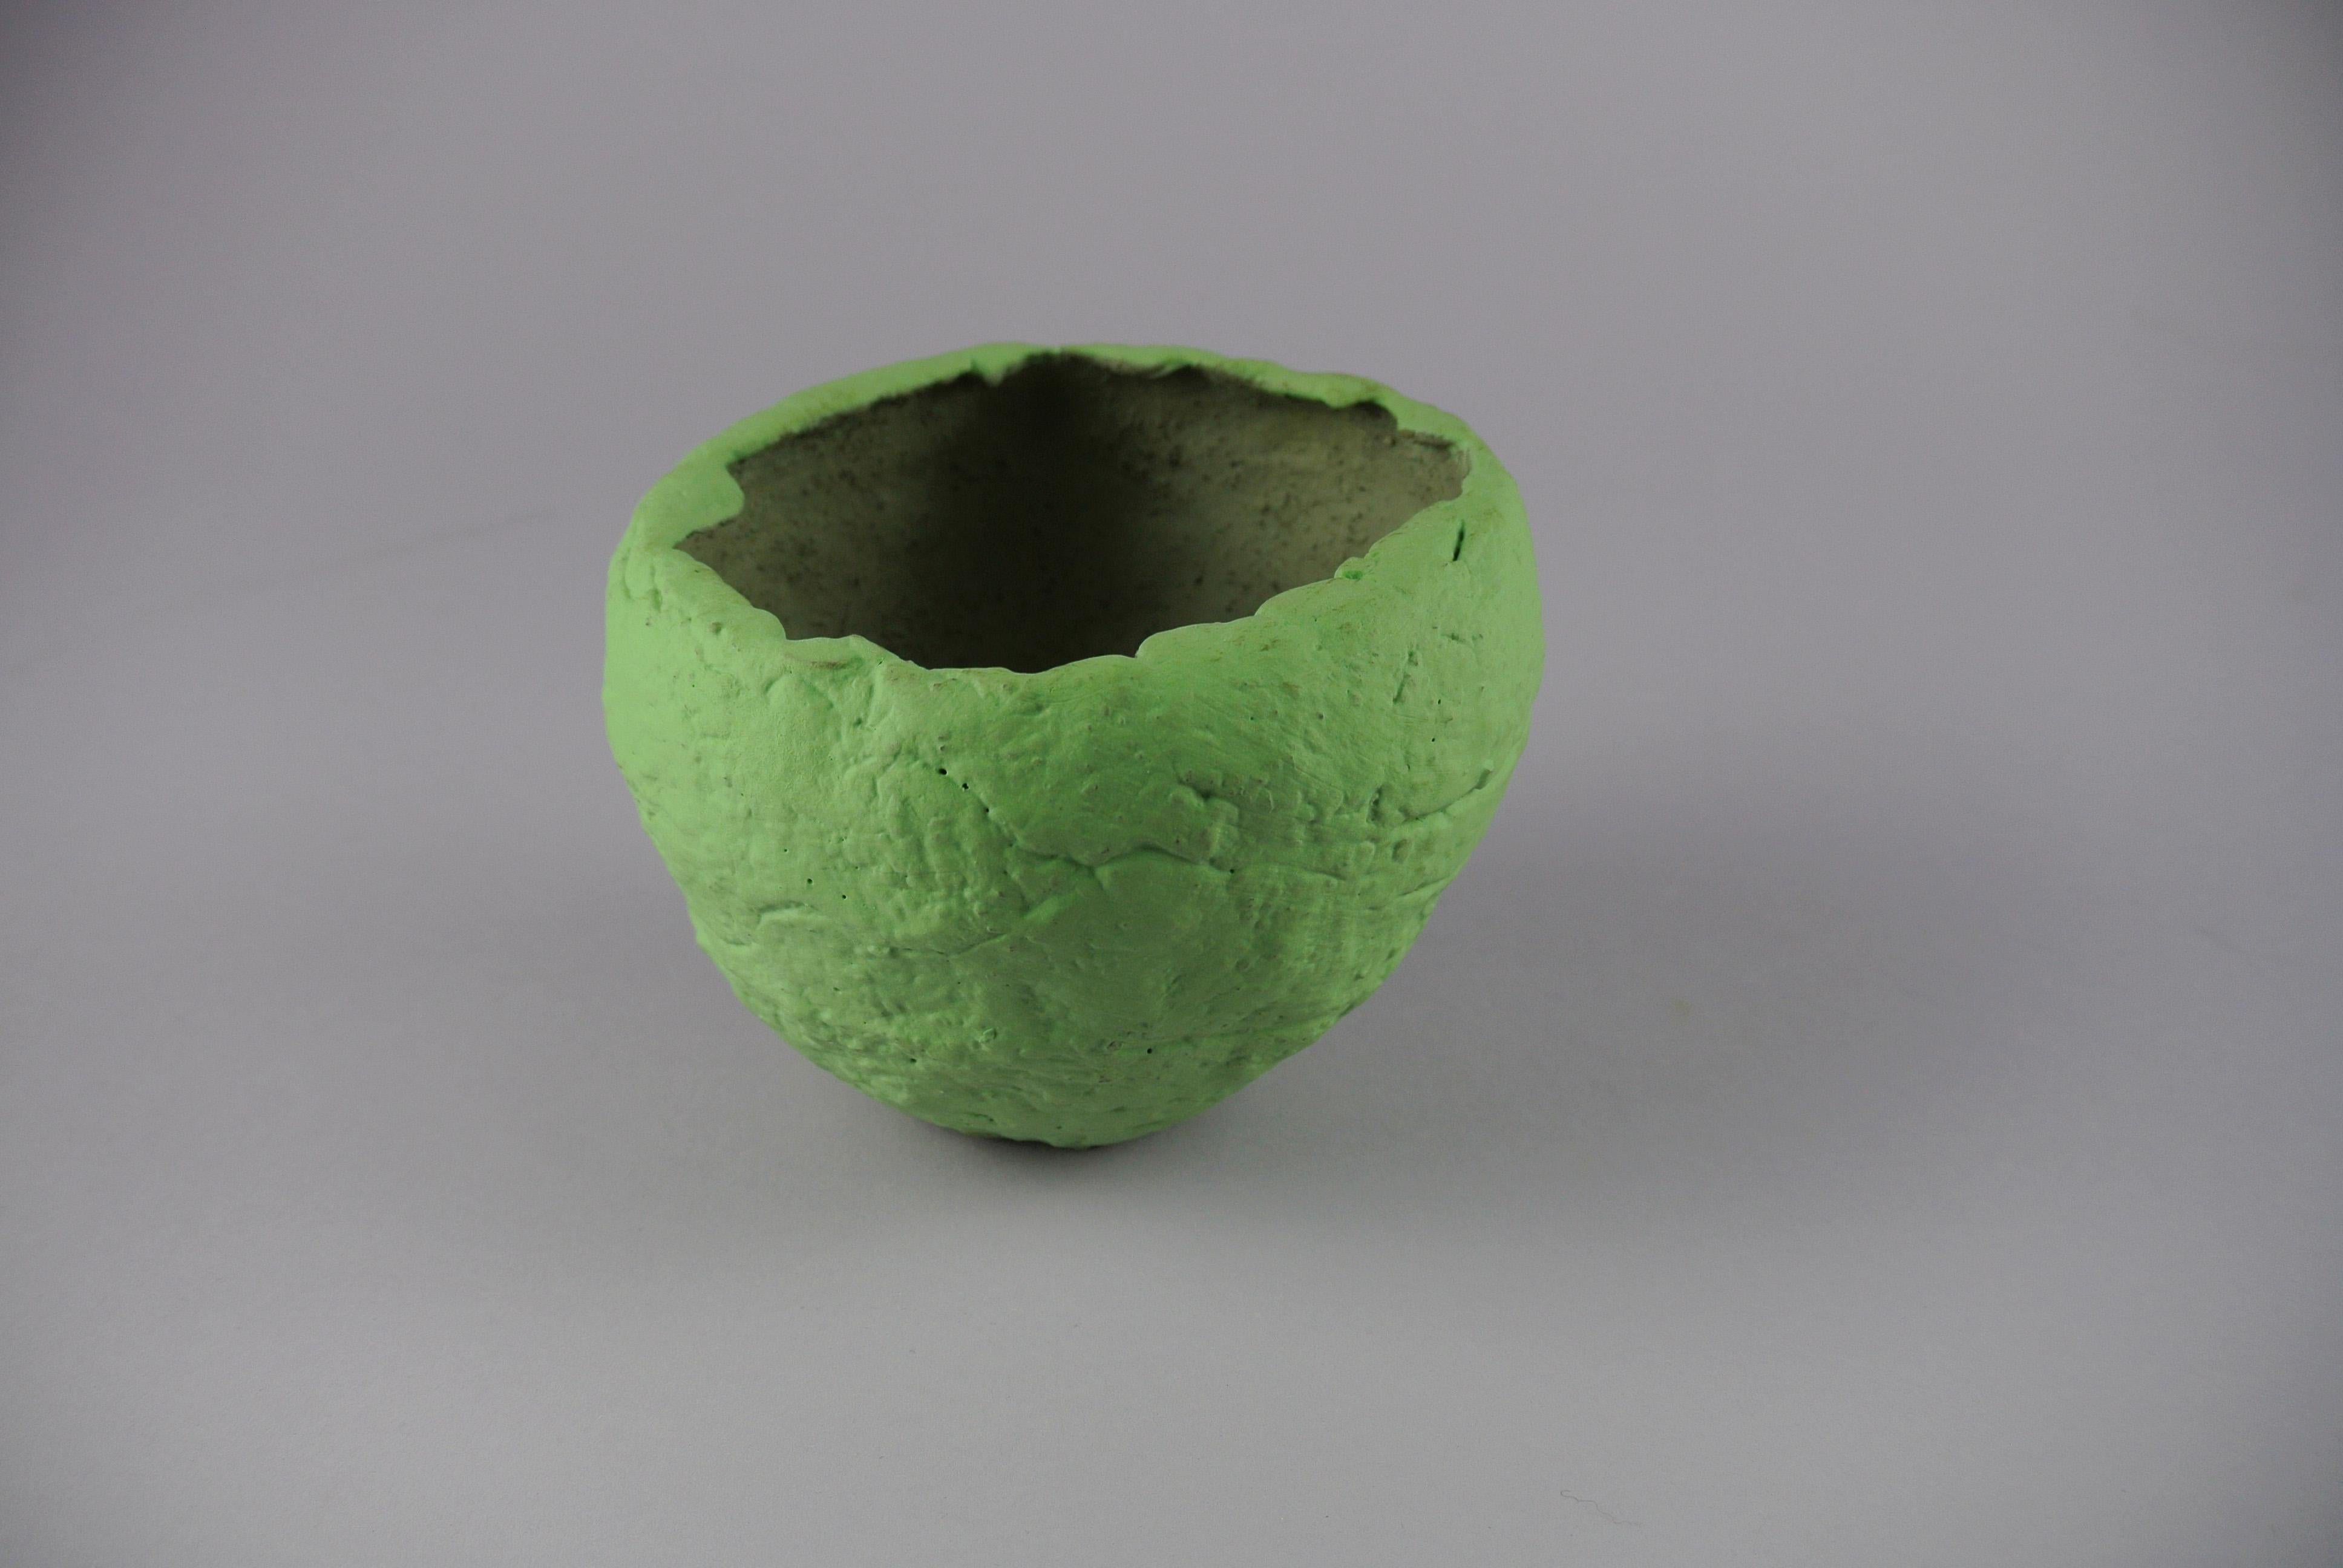 Rough grey stoneware plant vessel with matte lichen green engobe and visible fire sand texture.
The vessel has a hole in the bottom for drainage.